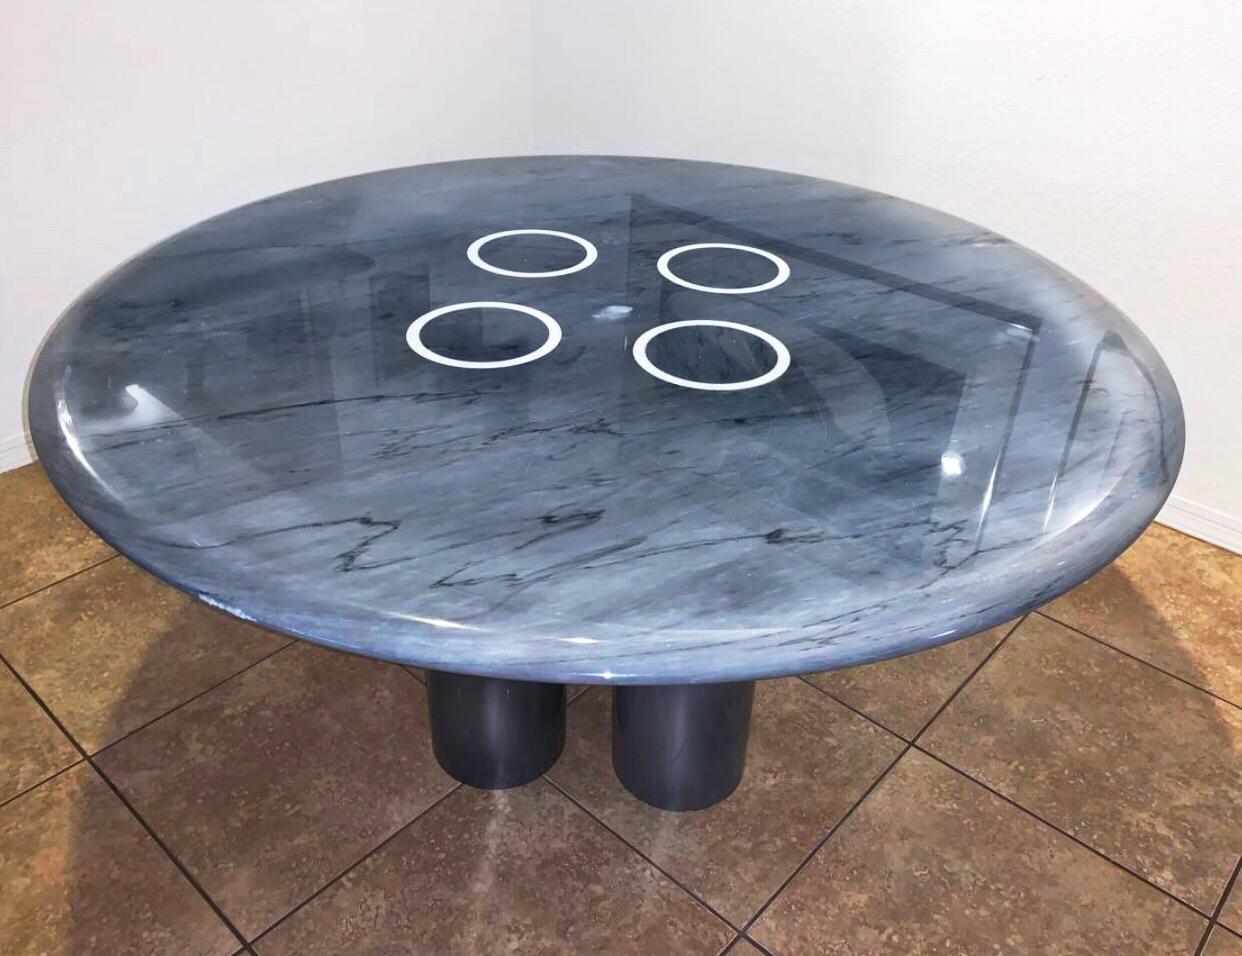 Postmodern Roche Bobois Italian modern round dining table Angelo Mangiarotti

Gorgeous burnished steel blue or grey marble, rounded edge, four central columnar supports. 1980s Roche Bobois. MSRP in the 1980s was over 8,000 USD. Single owner.